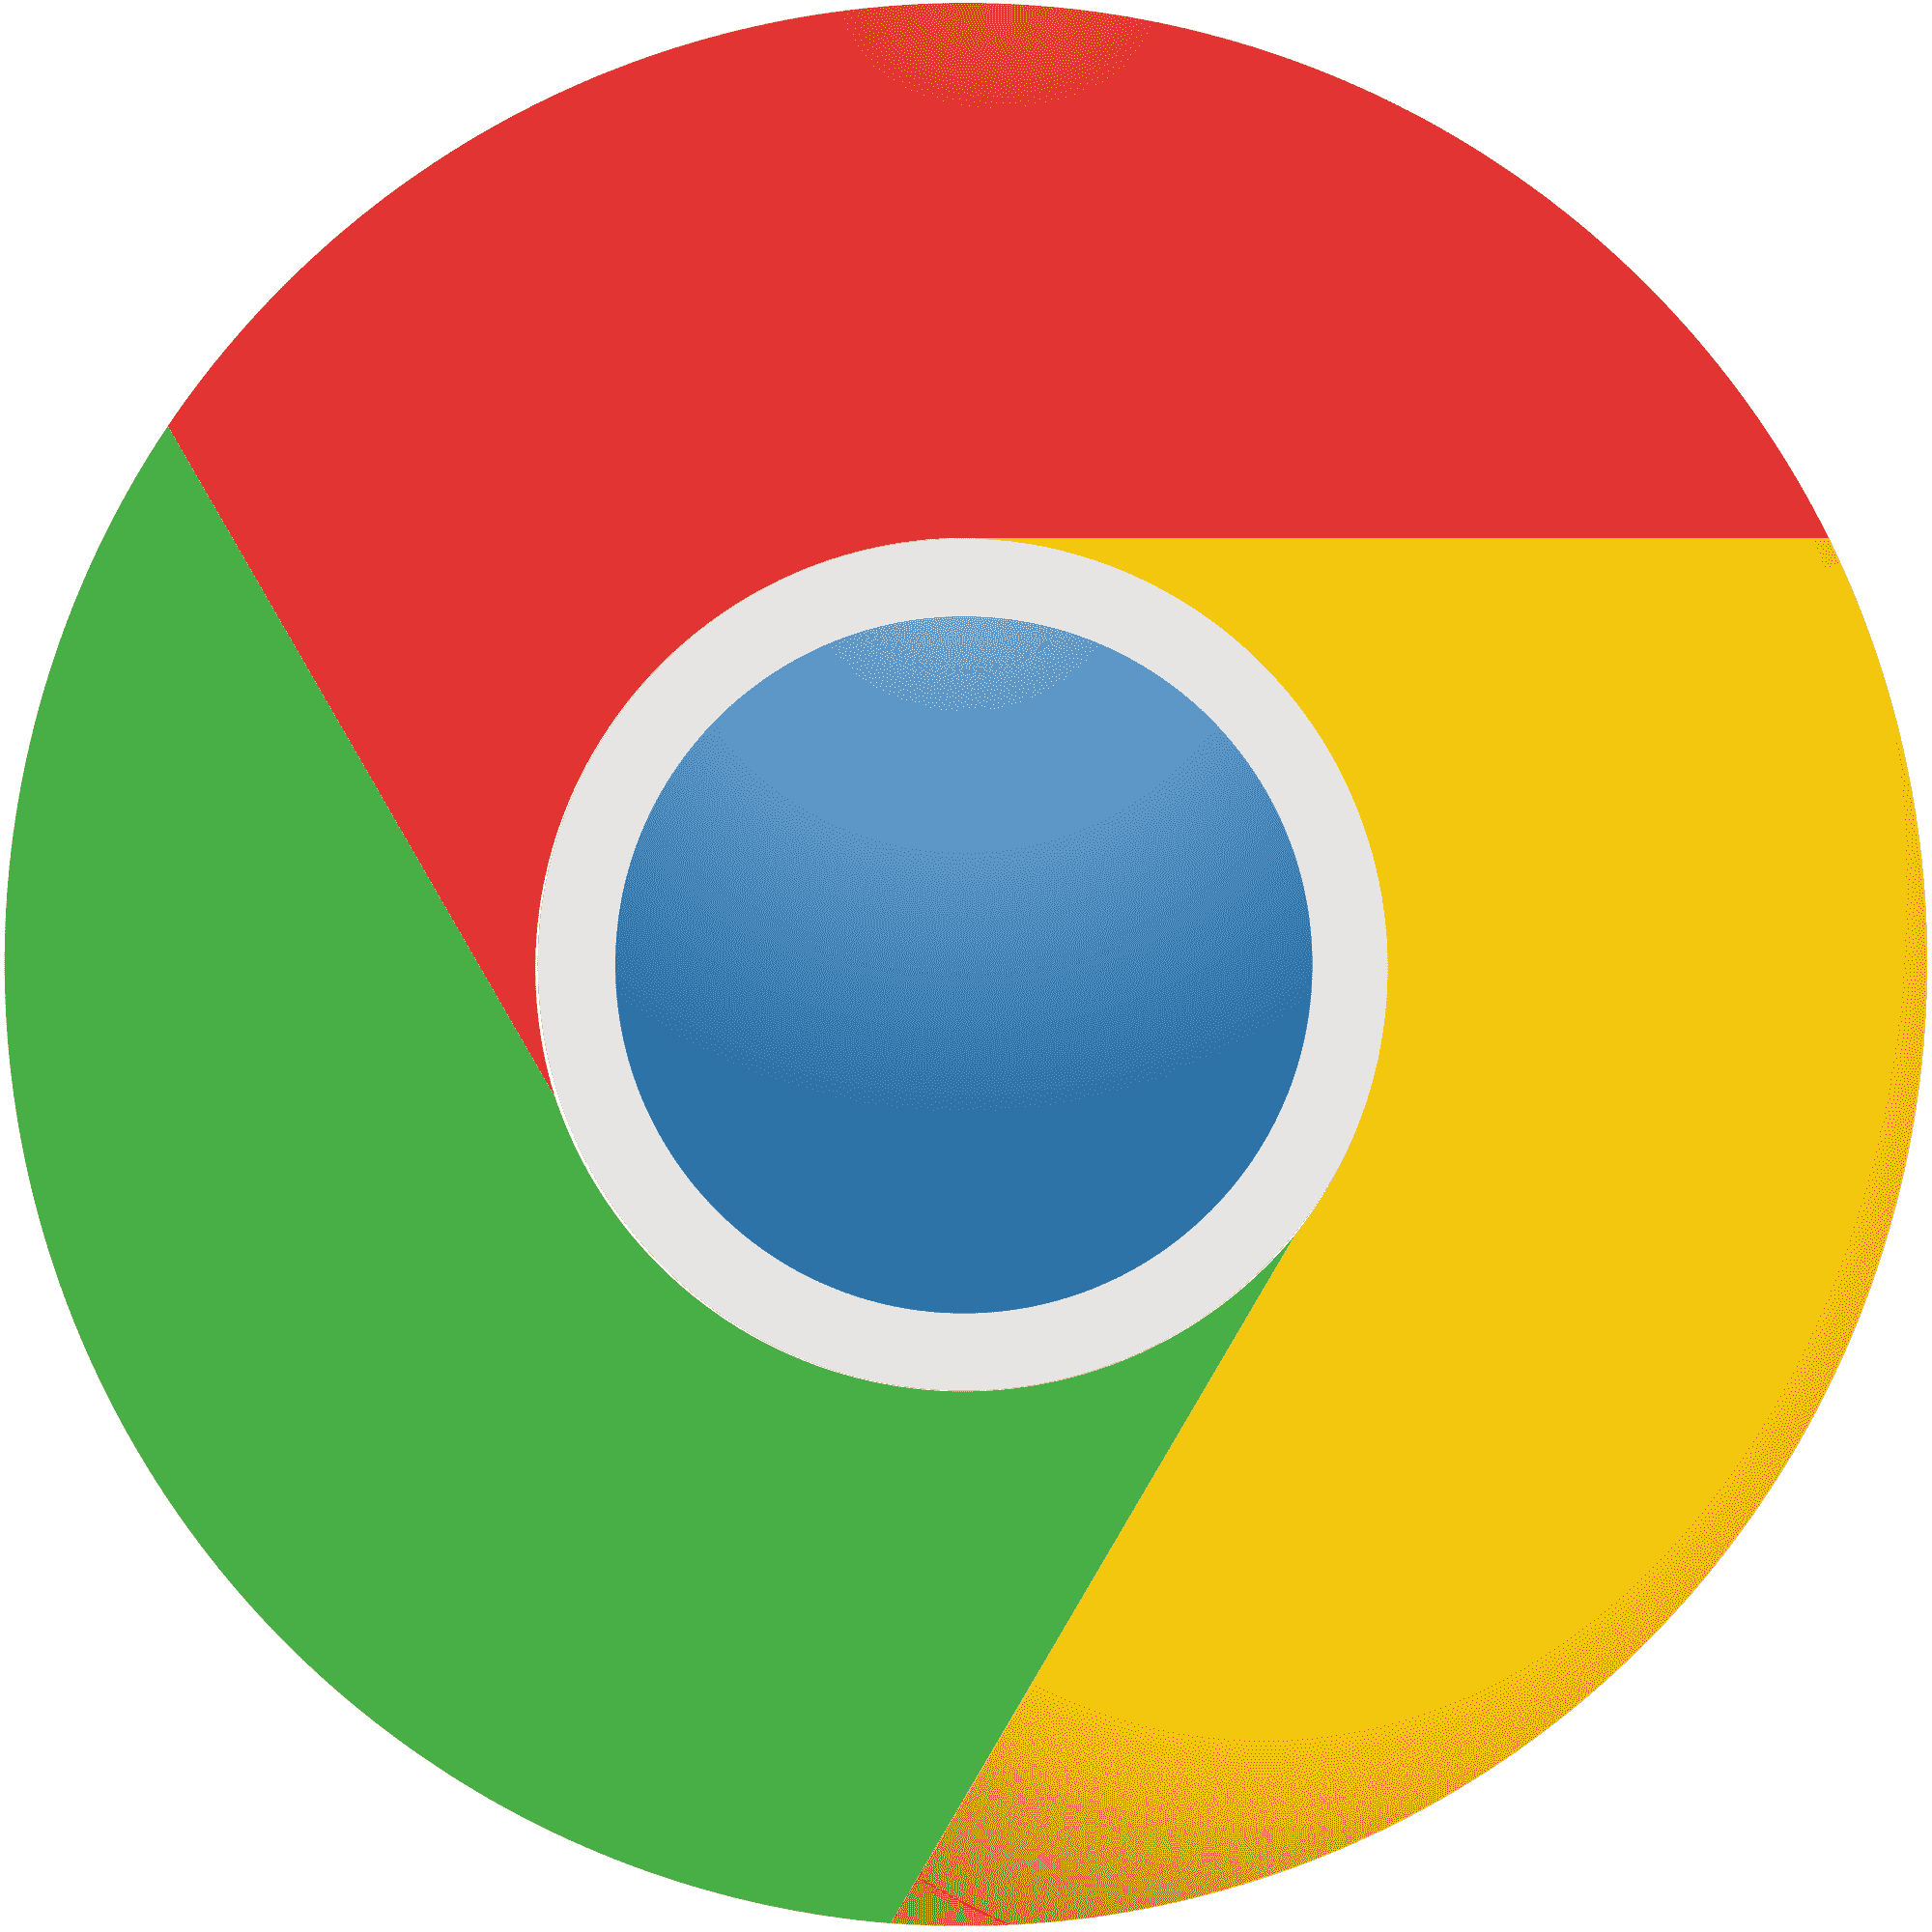 browsers not based on chromium